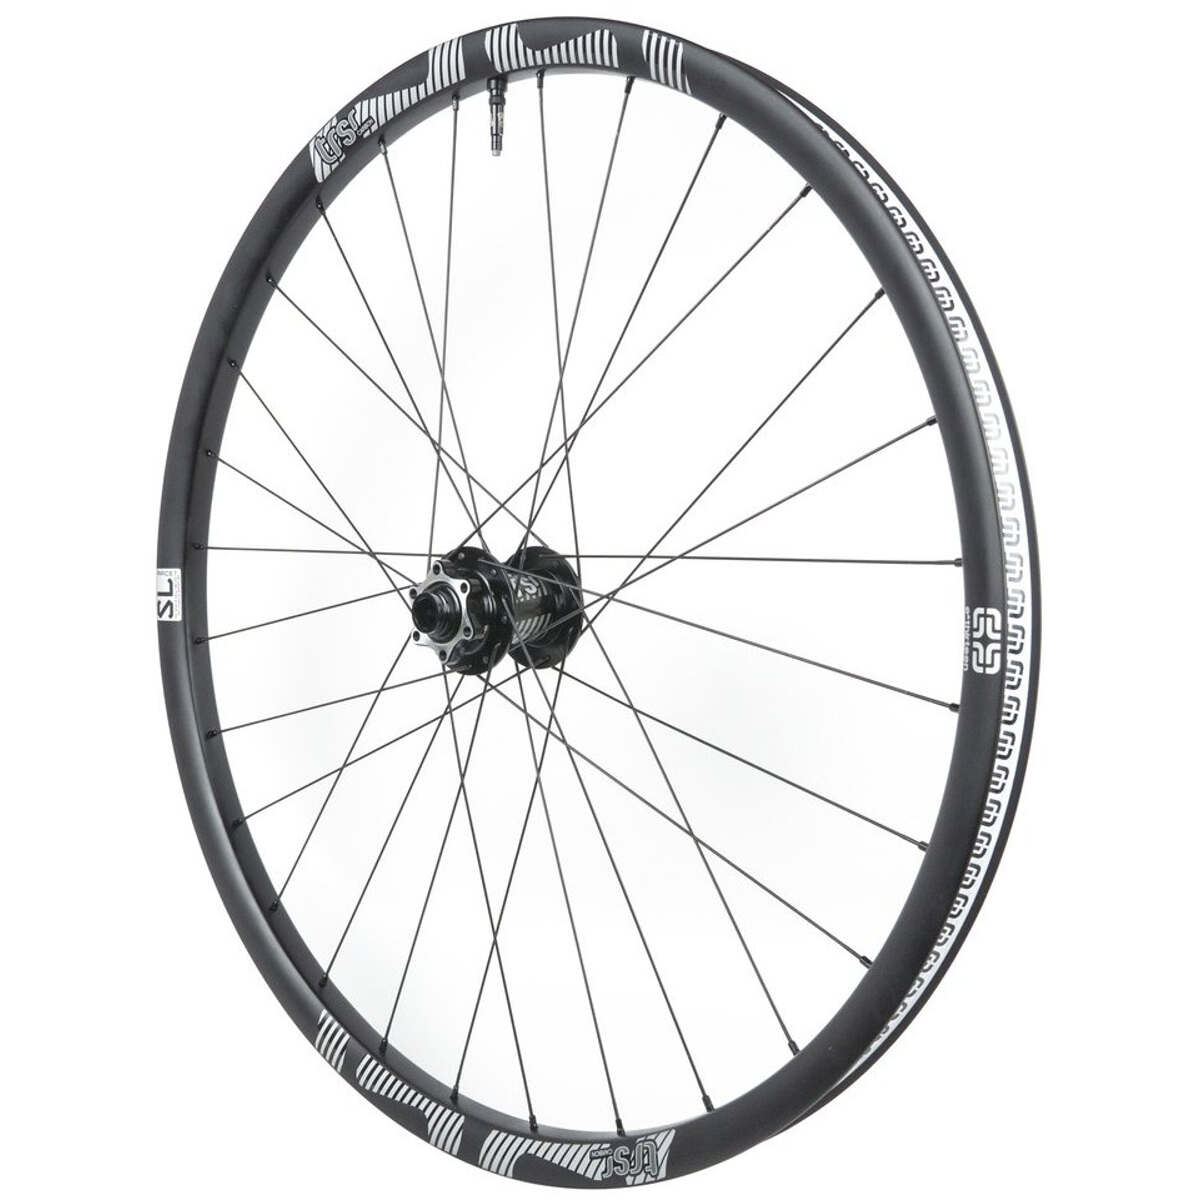 E*thirteen Wheel TRS Race Carbon SL Front, 27.5 Inches, 110x15 mm, Boost, 28 mm, tubeless ready, Black